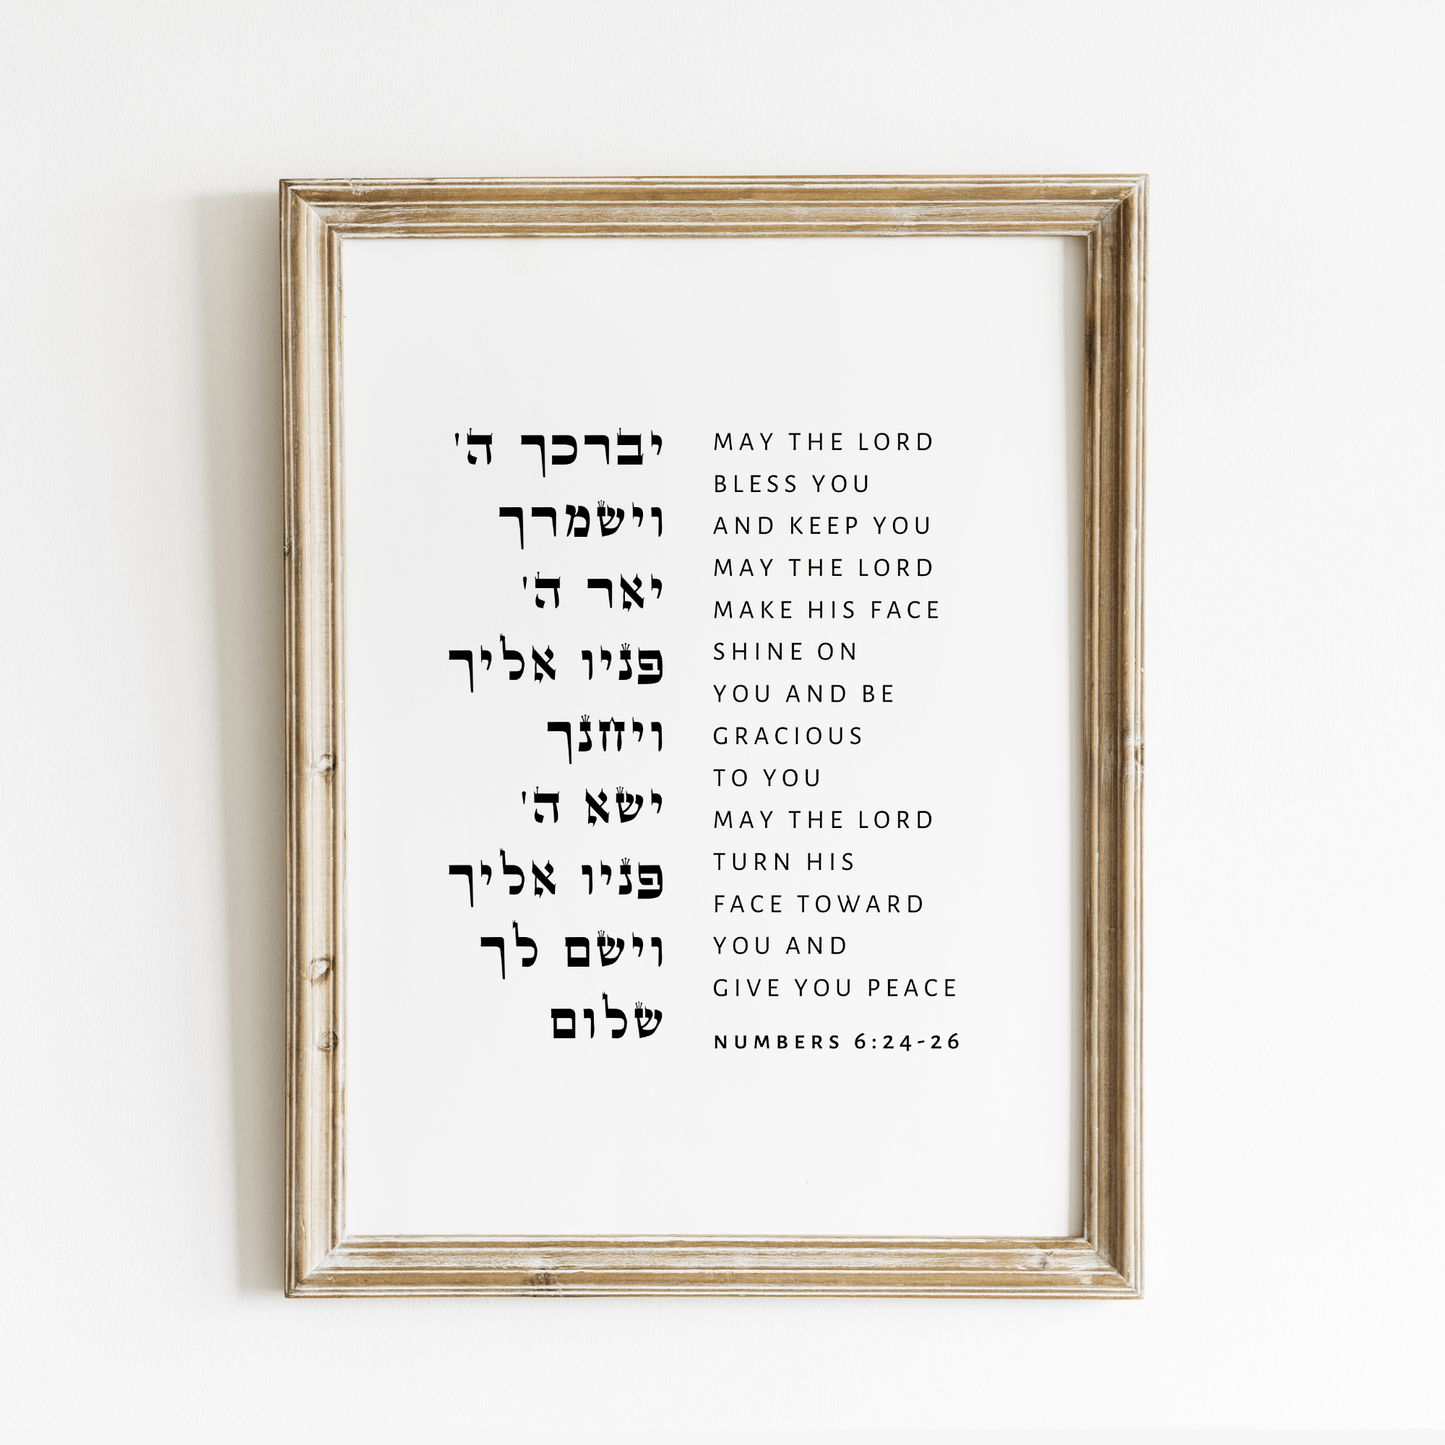 Gelato Numbers 6:24-26 - The Lord Bless You and Keep You Numbers 6:24-26 Priestly Blessing Bible Verse Wall Art Judaica Gifts